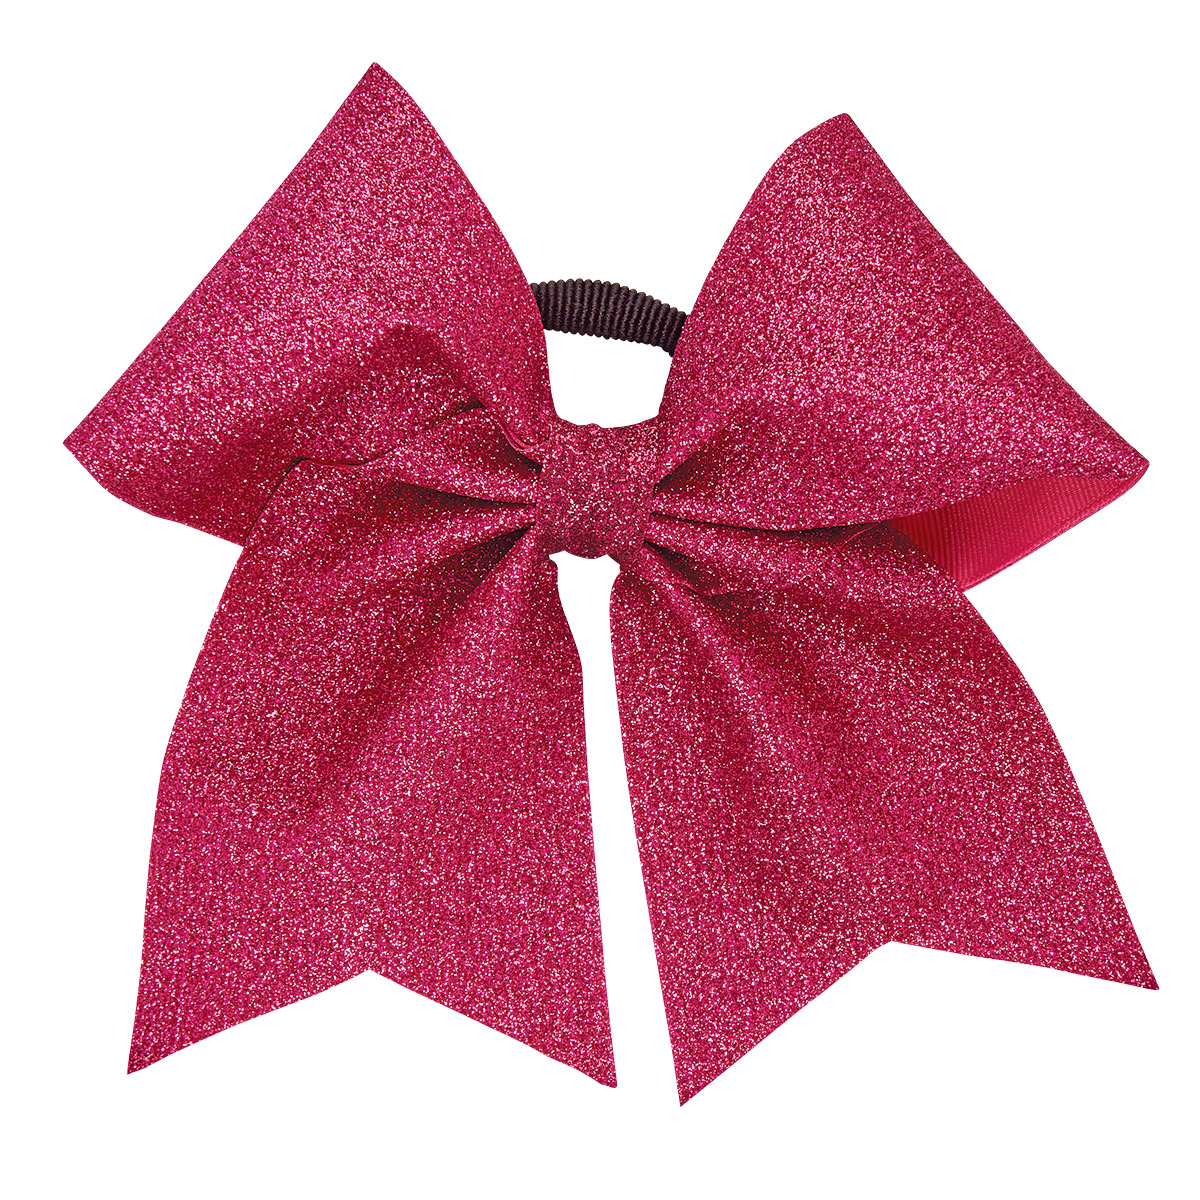 Cheerleading Pom Poms And Large Cheer Hair Bow For Girl, Metallic C